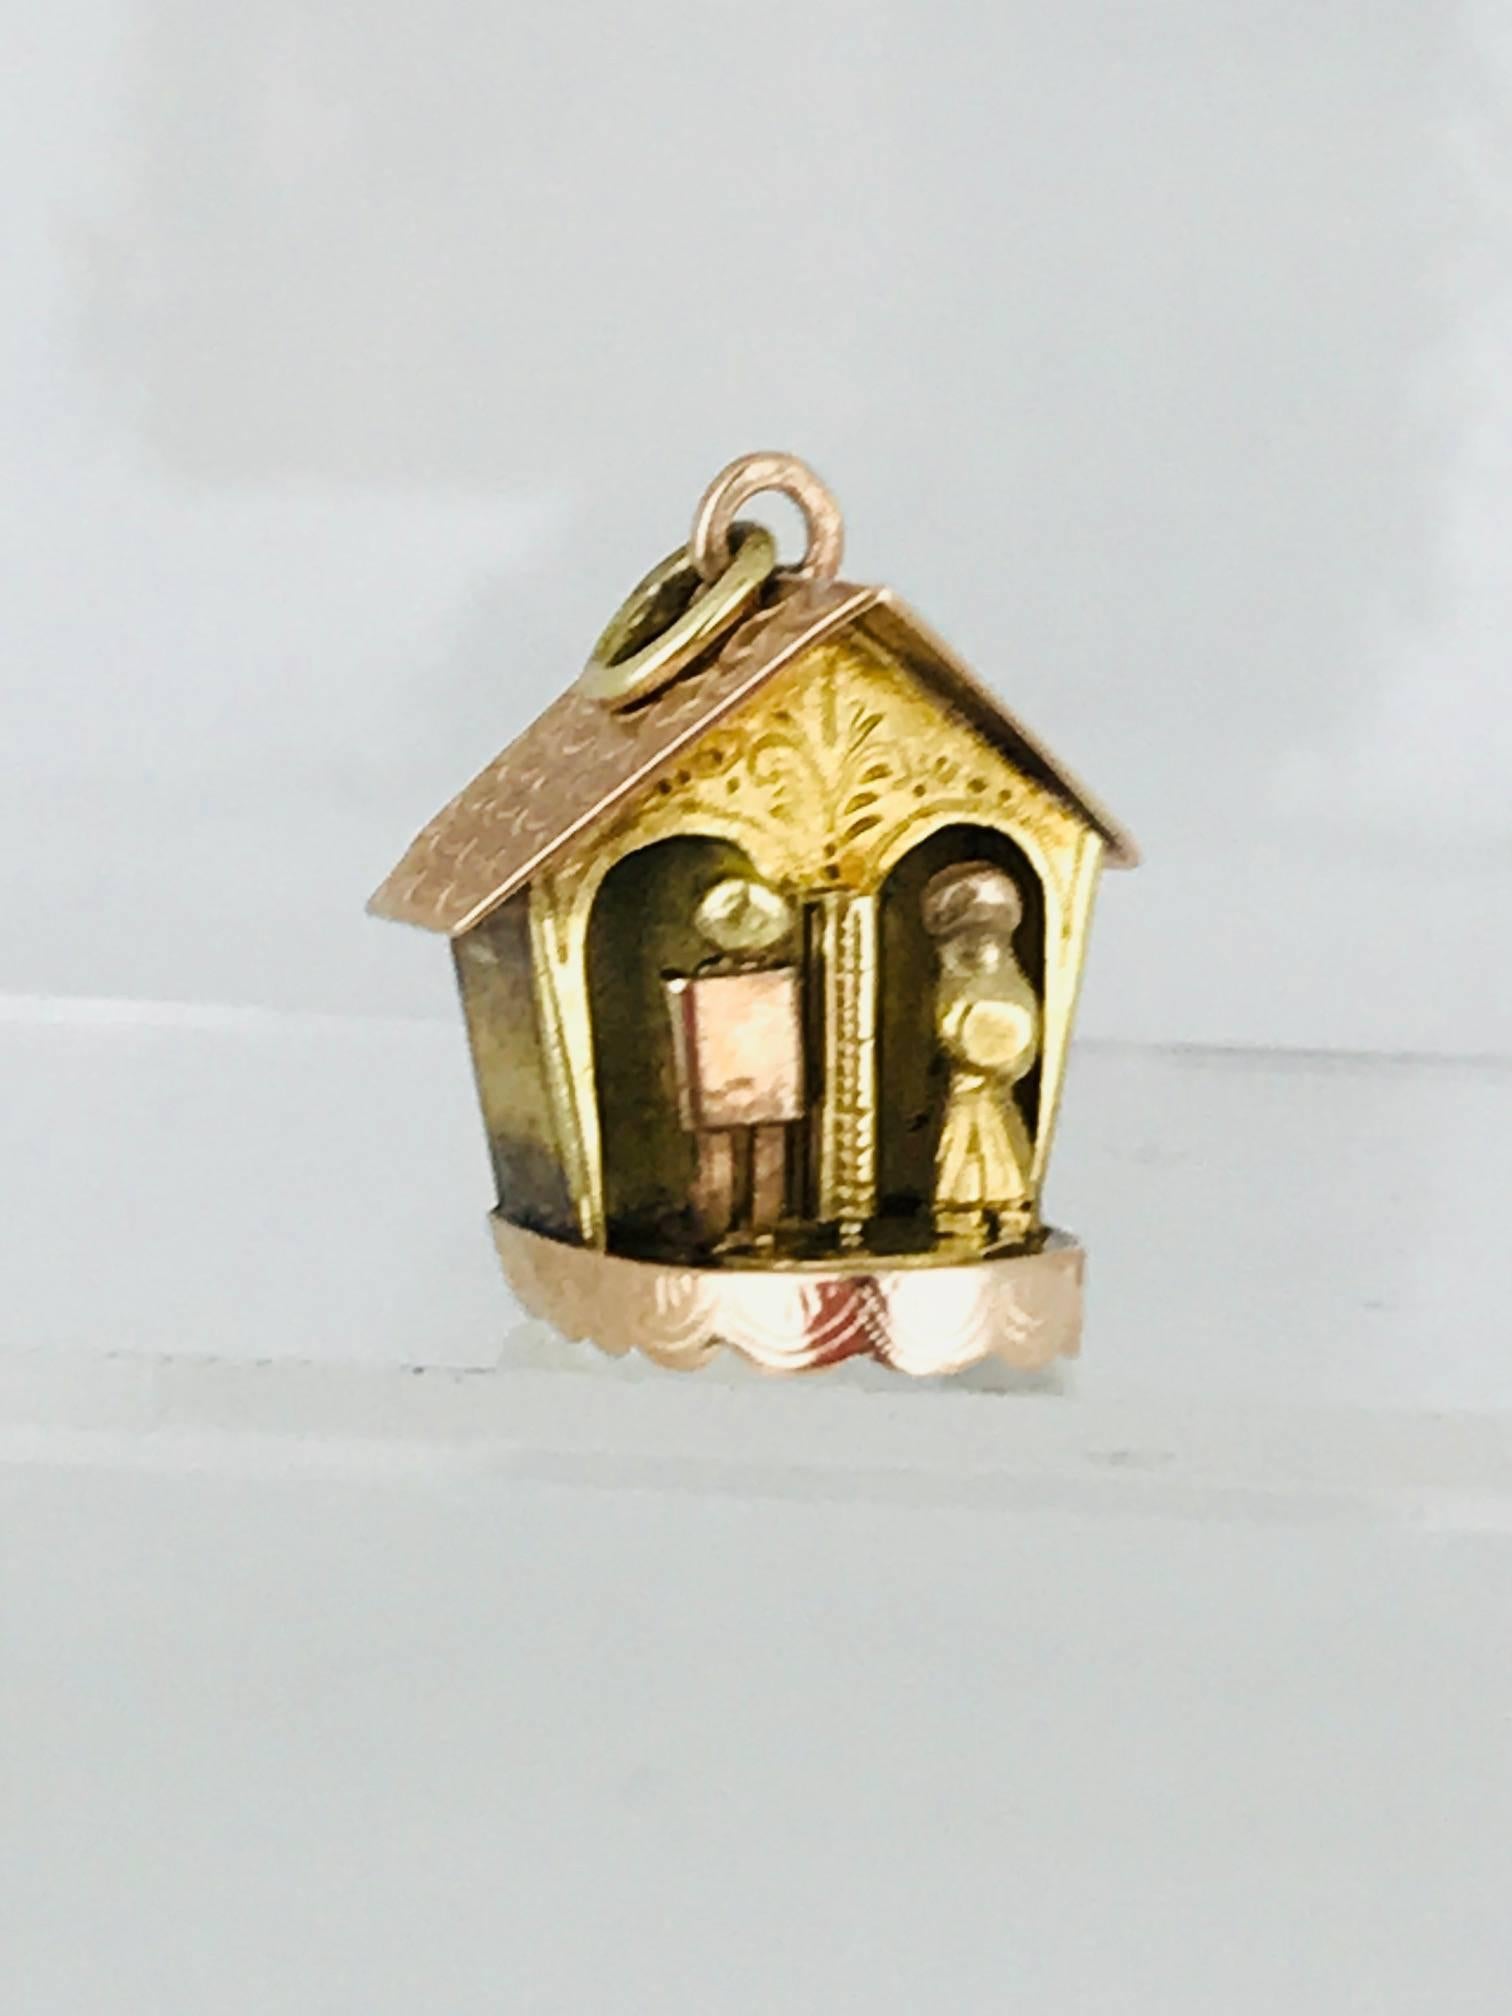 House with movable people, spin in a circle through the house. 14 karat yellow and pink gold this charm is handmade. Circa 1950
Rare, one of a kind collectable.

GIA Gemologist, Inspected & Evaluated.